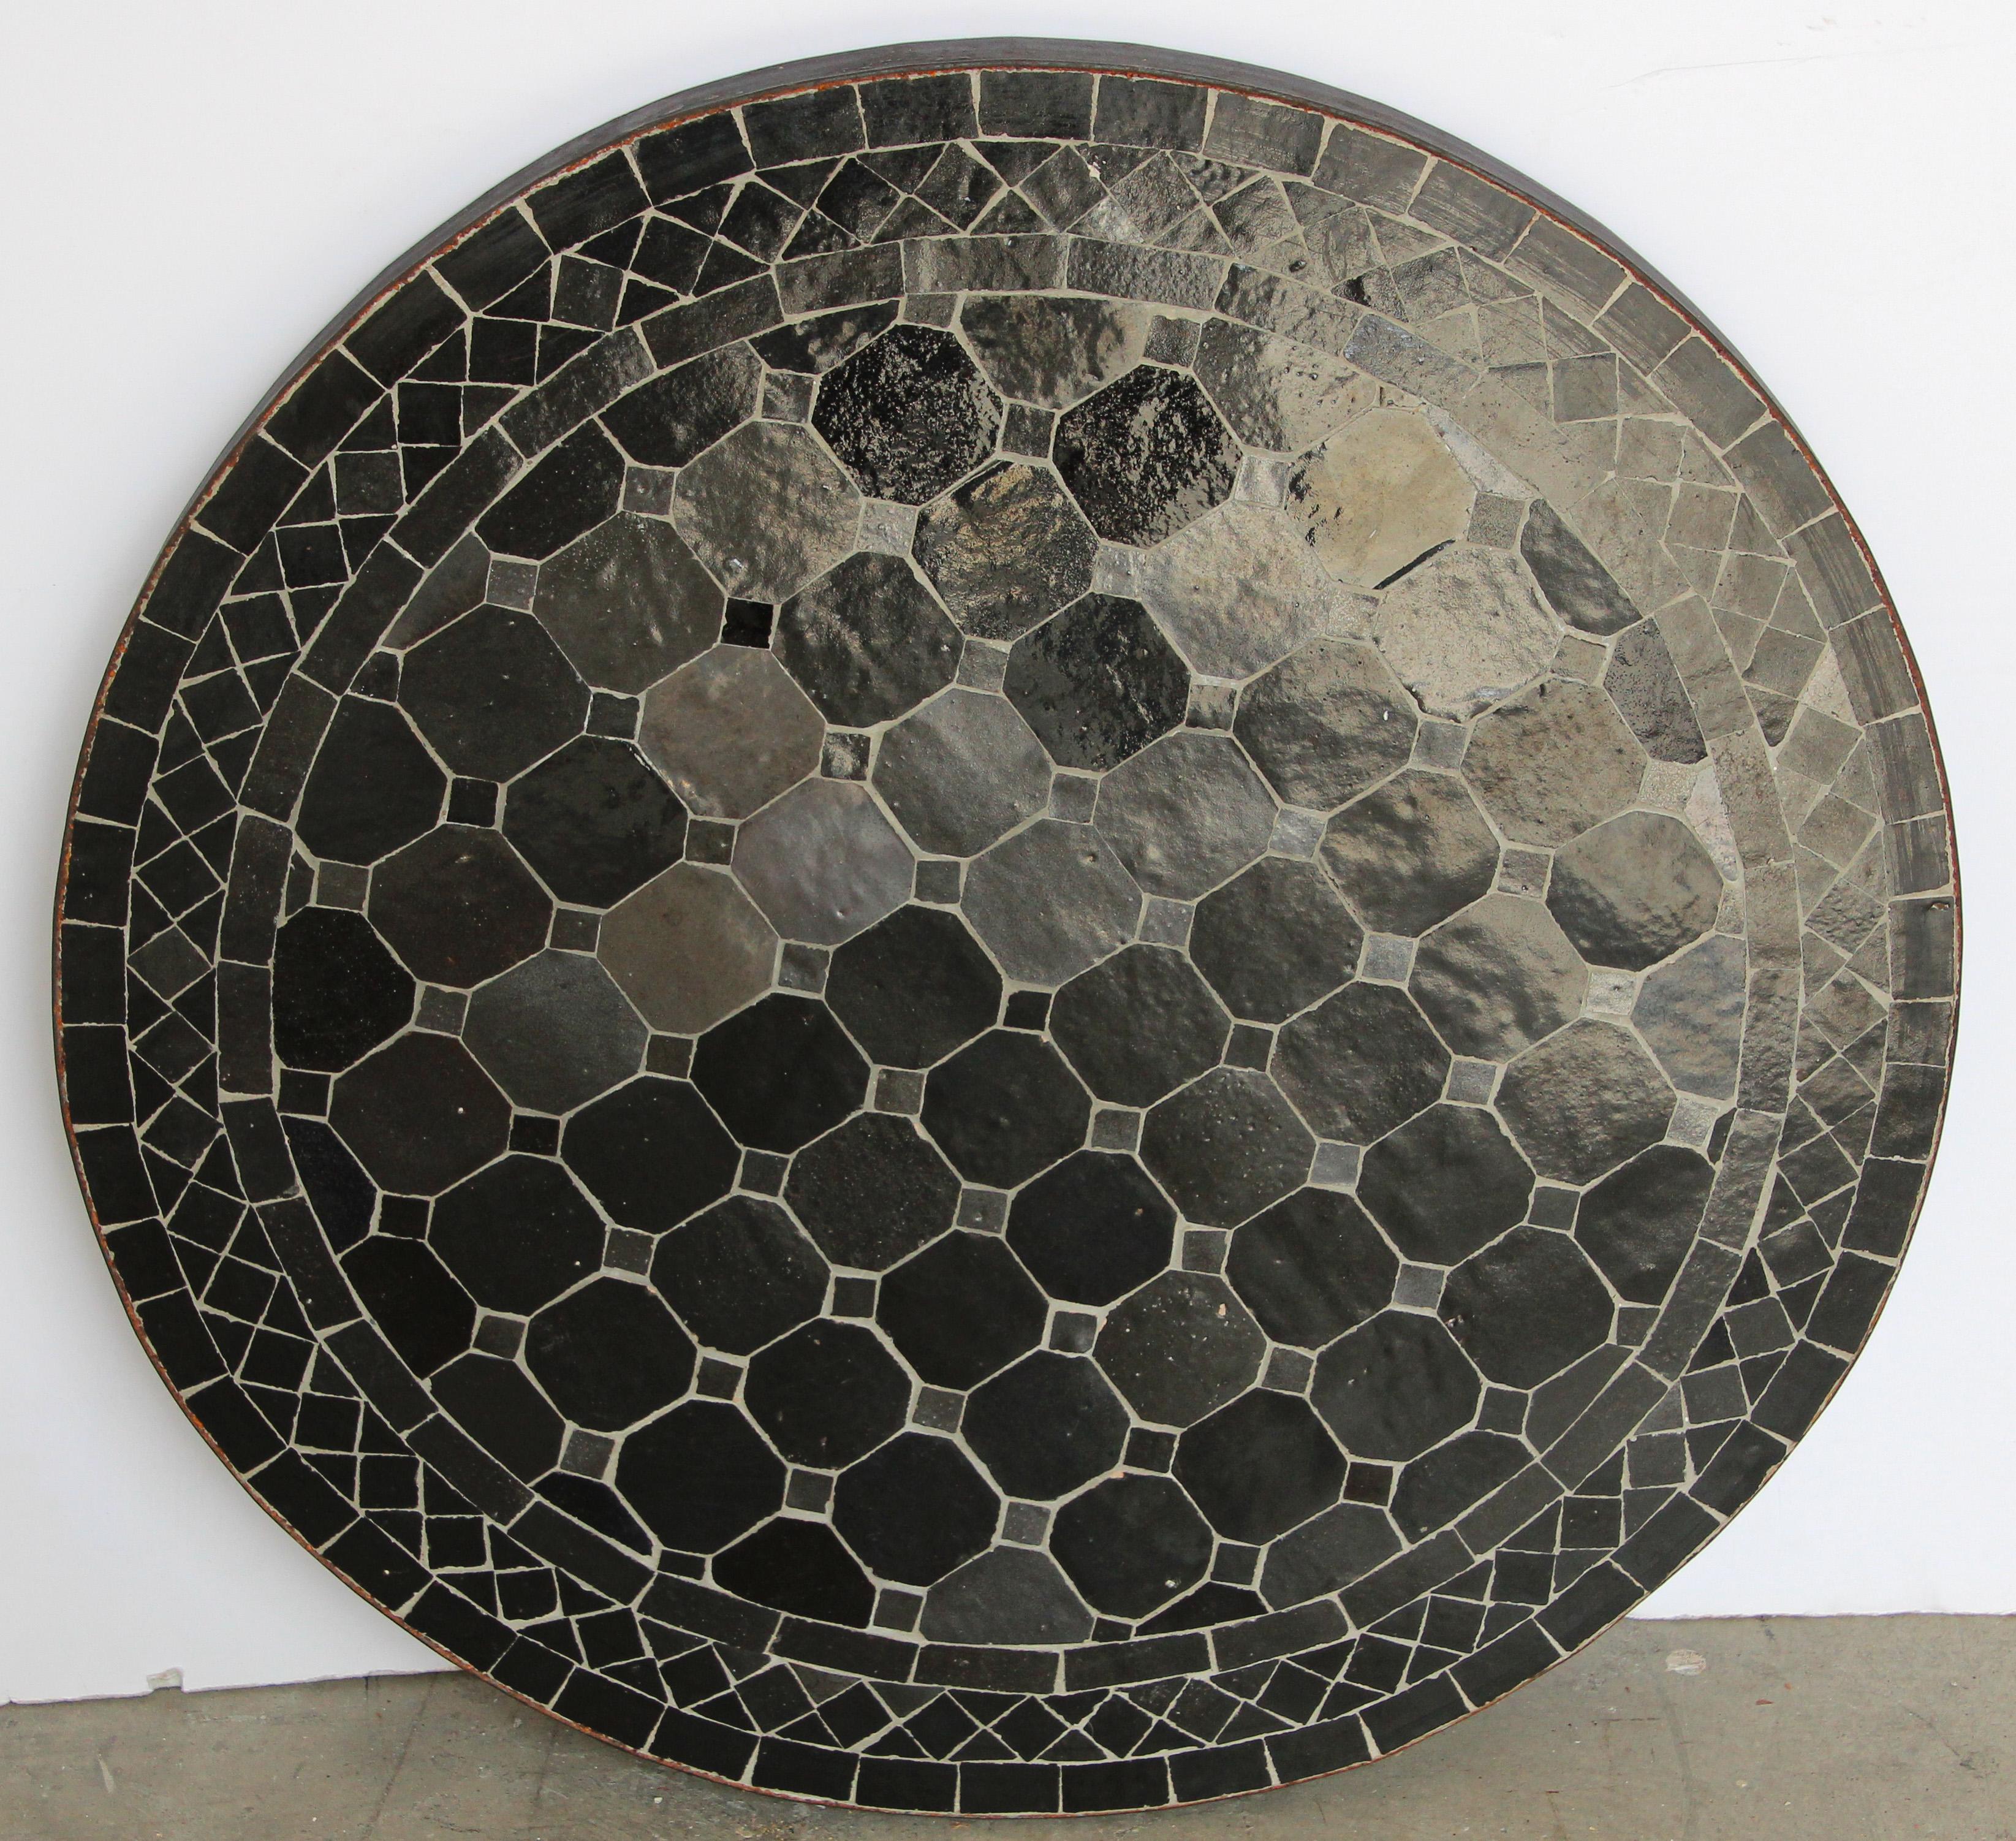 Moroccan mosaic tiles bistro table on iron base.
Handmade by expert artisans in Fez, Morocco using reclaimed old glazed anthracite black color tiles inlaid in concrete using reclaimed old glazed tiles and making beautiful geometrical designs,